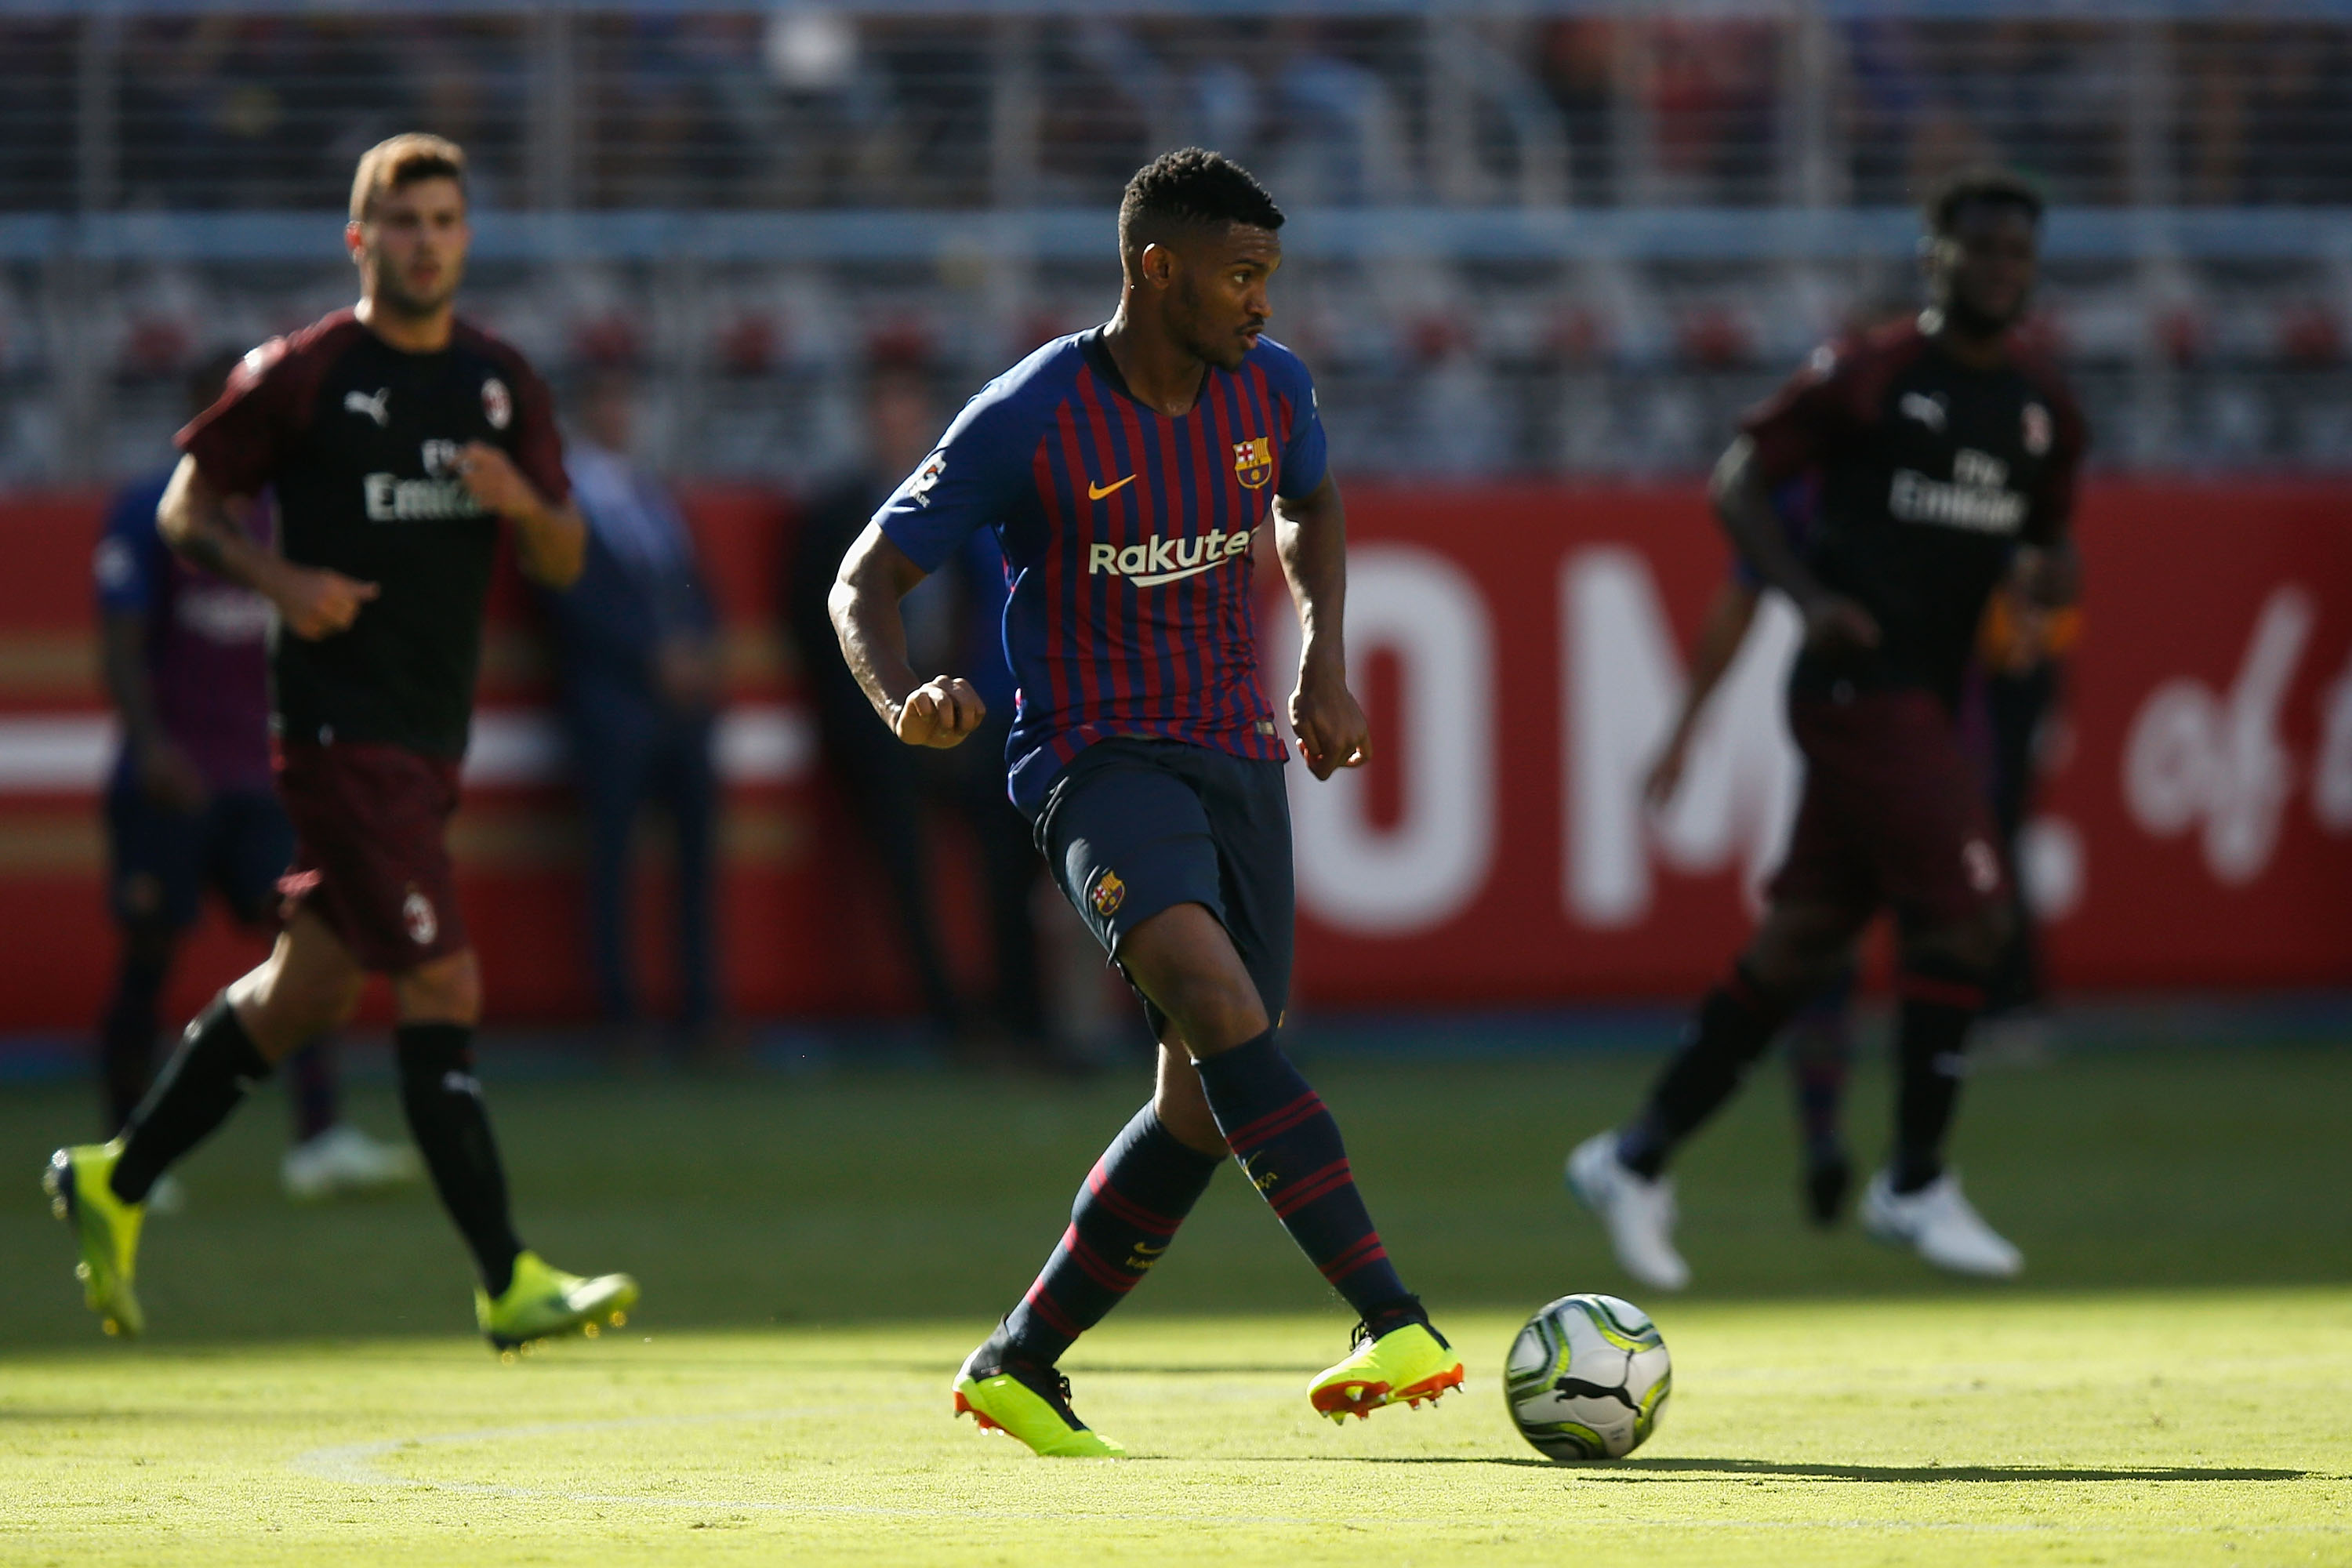 SANTA CLARA, CA - AUGUST 04: Marlon Santos #5 of FC Barcelona kicks the ball during the International Champions Cup match against AC Milan at Levi's Stadium on August 4, 2018 in Santa Clara, California. (Photo by Lachlan Cunningham/Getty Images)